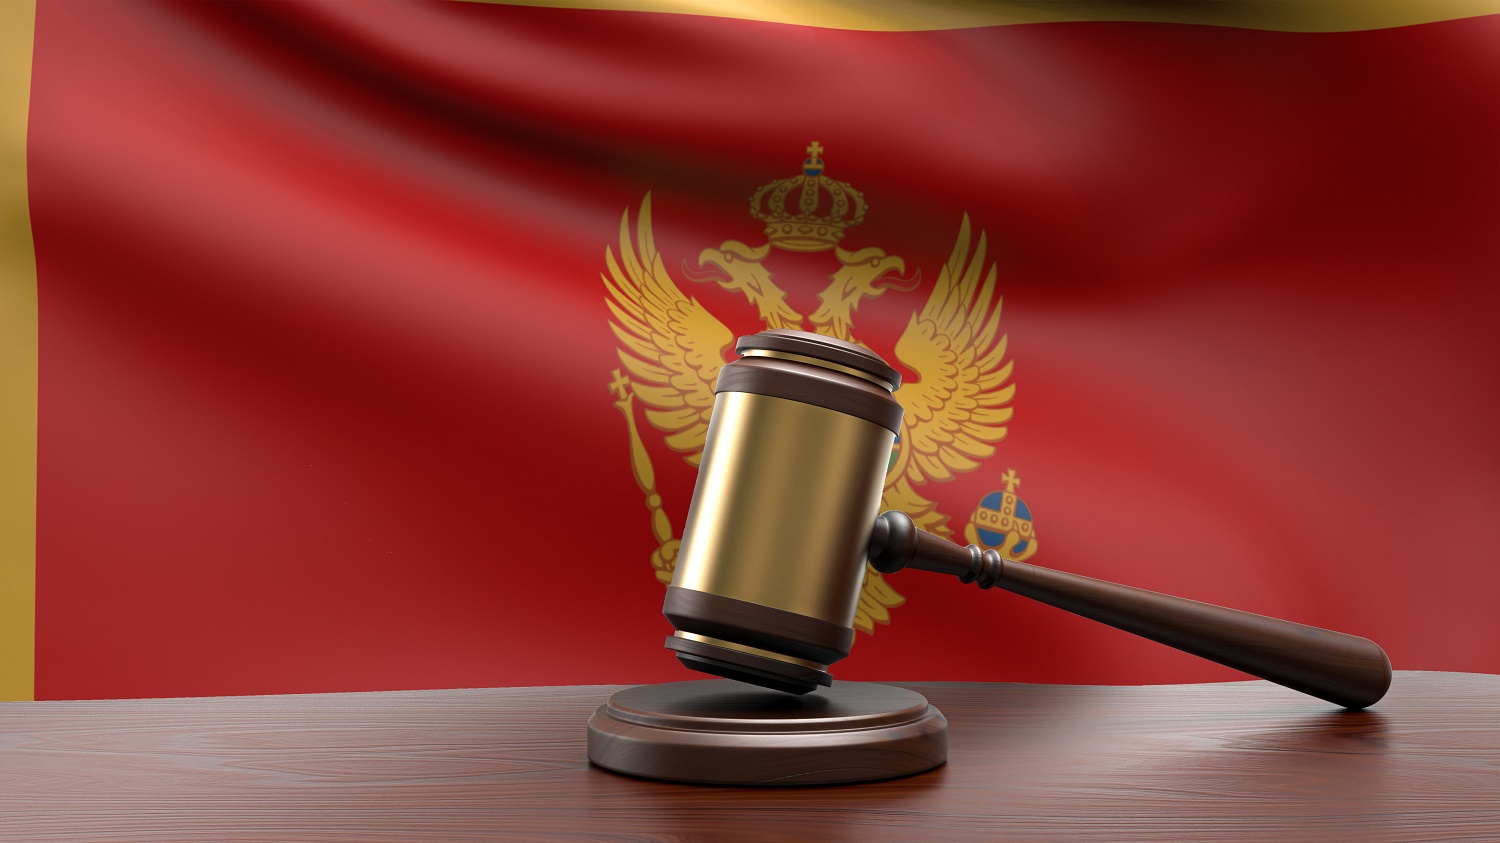 A judge’s gavel and block on a desk in front of the Montenegro national flag.